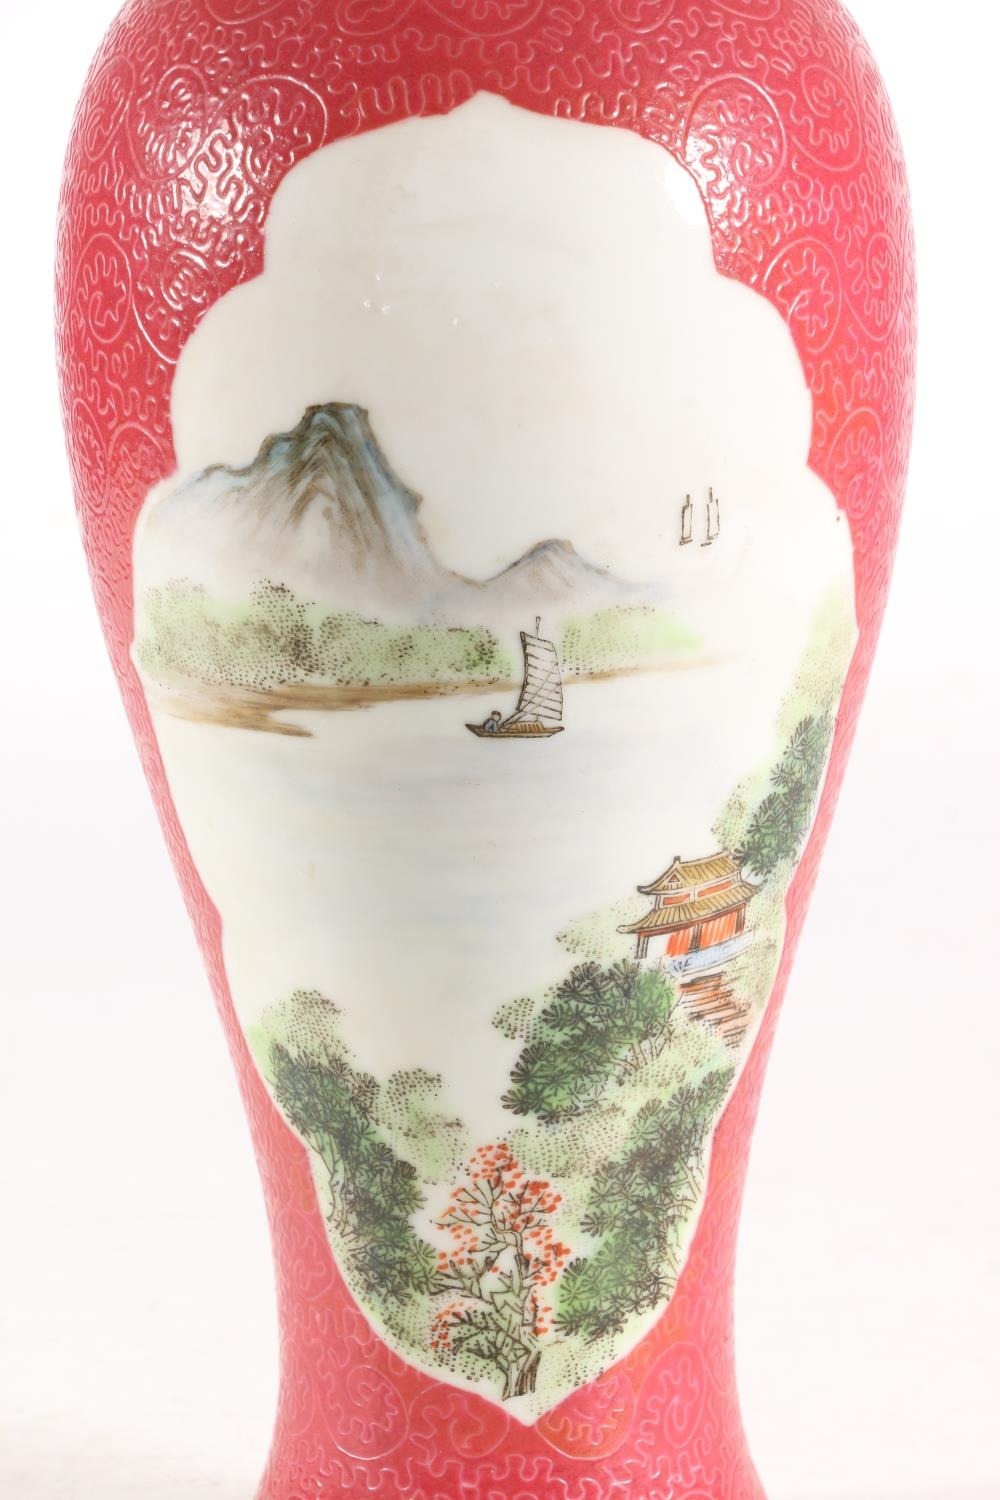 Chinese Jingdezhen porcelain vase, mid-20th century, the painted polychrome landscapes within - Image 2 of 7